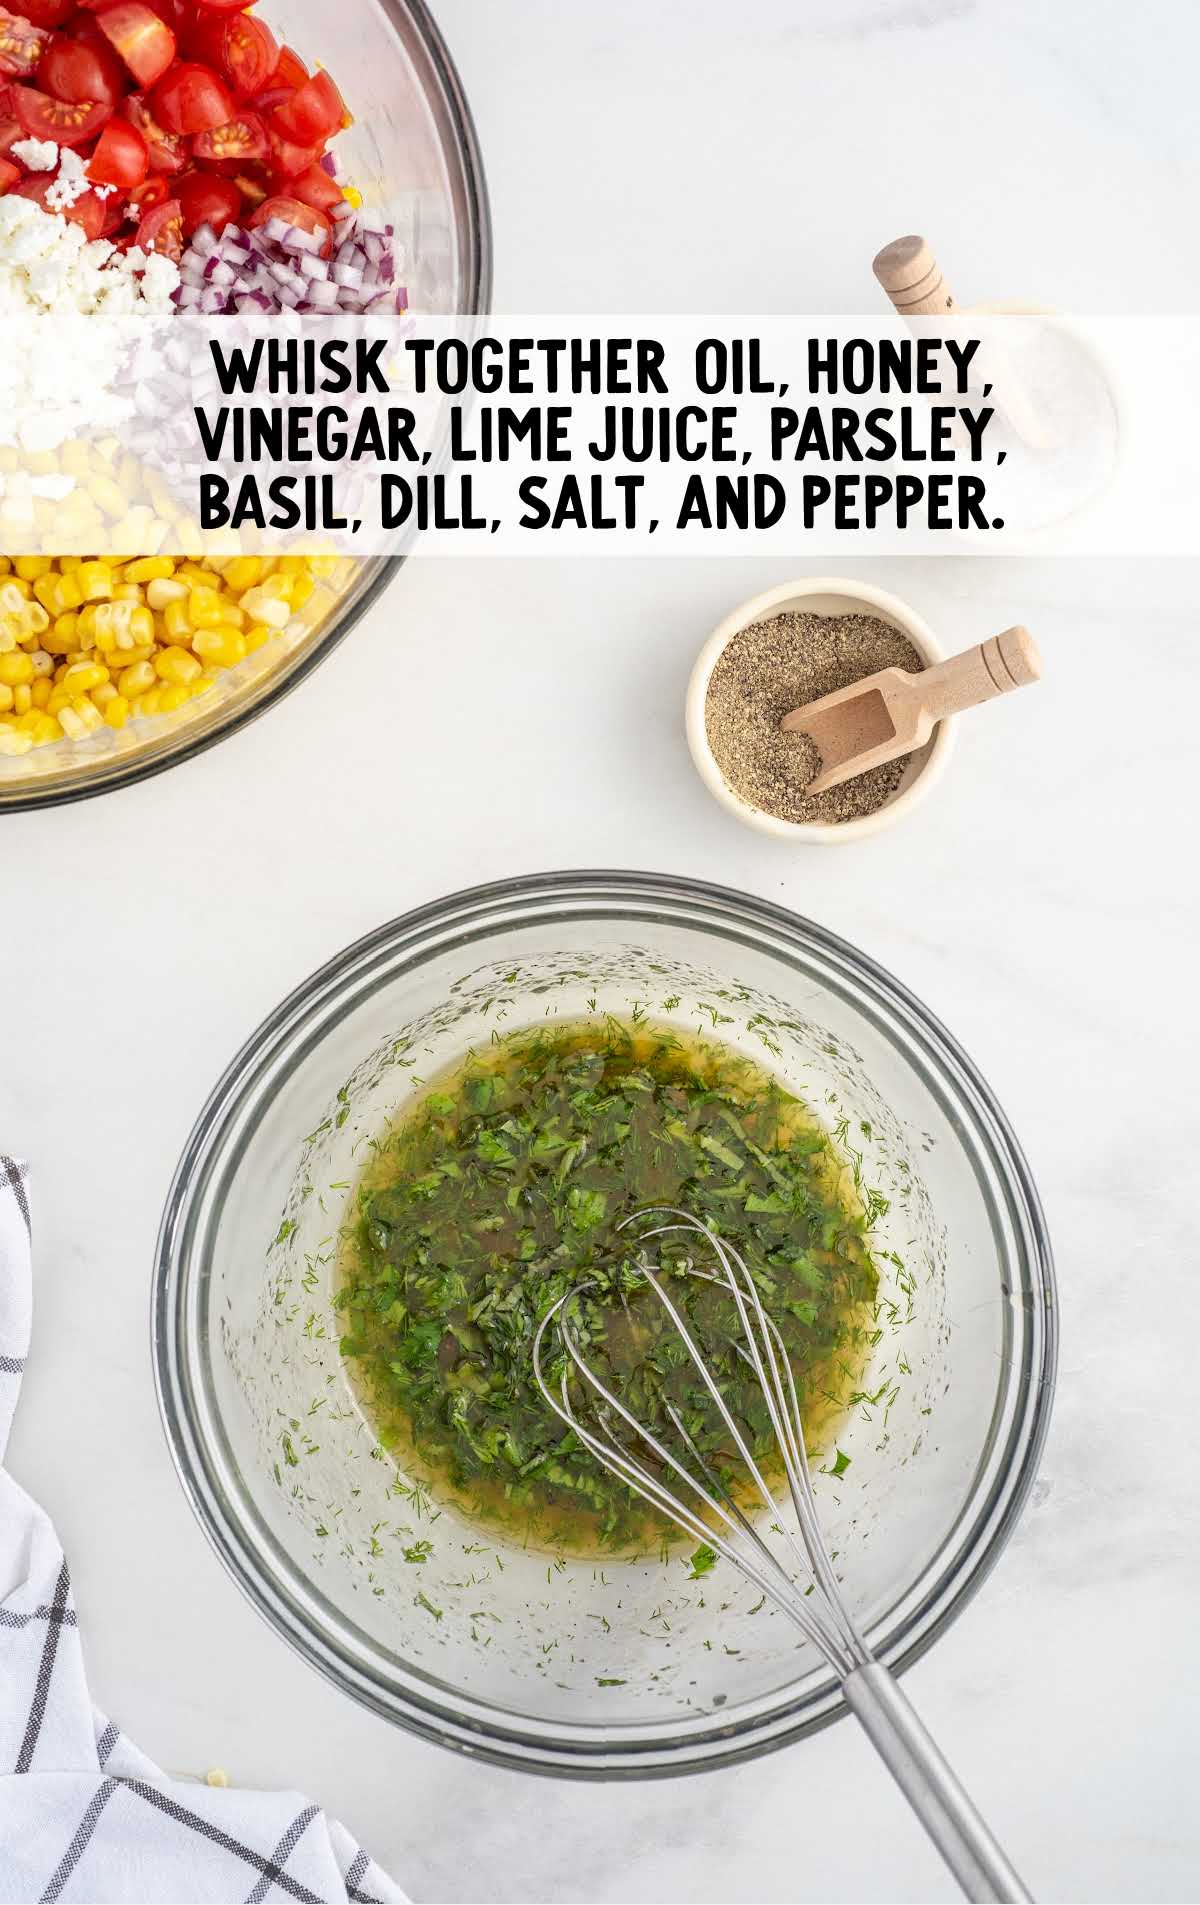 oil, honey, vinegar, lime, parsley, basil, dill, salt, and pepper whisked together in a bowl